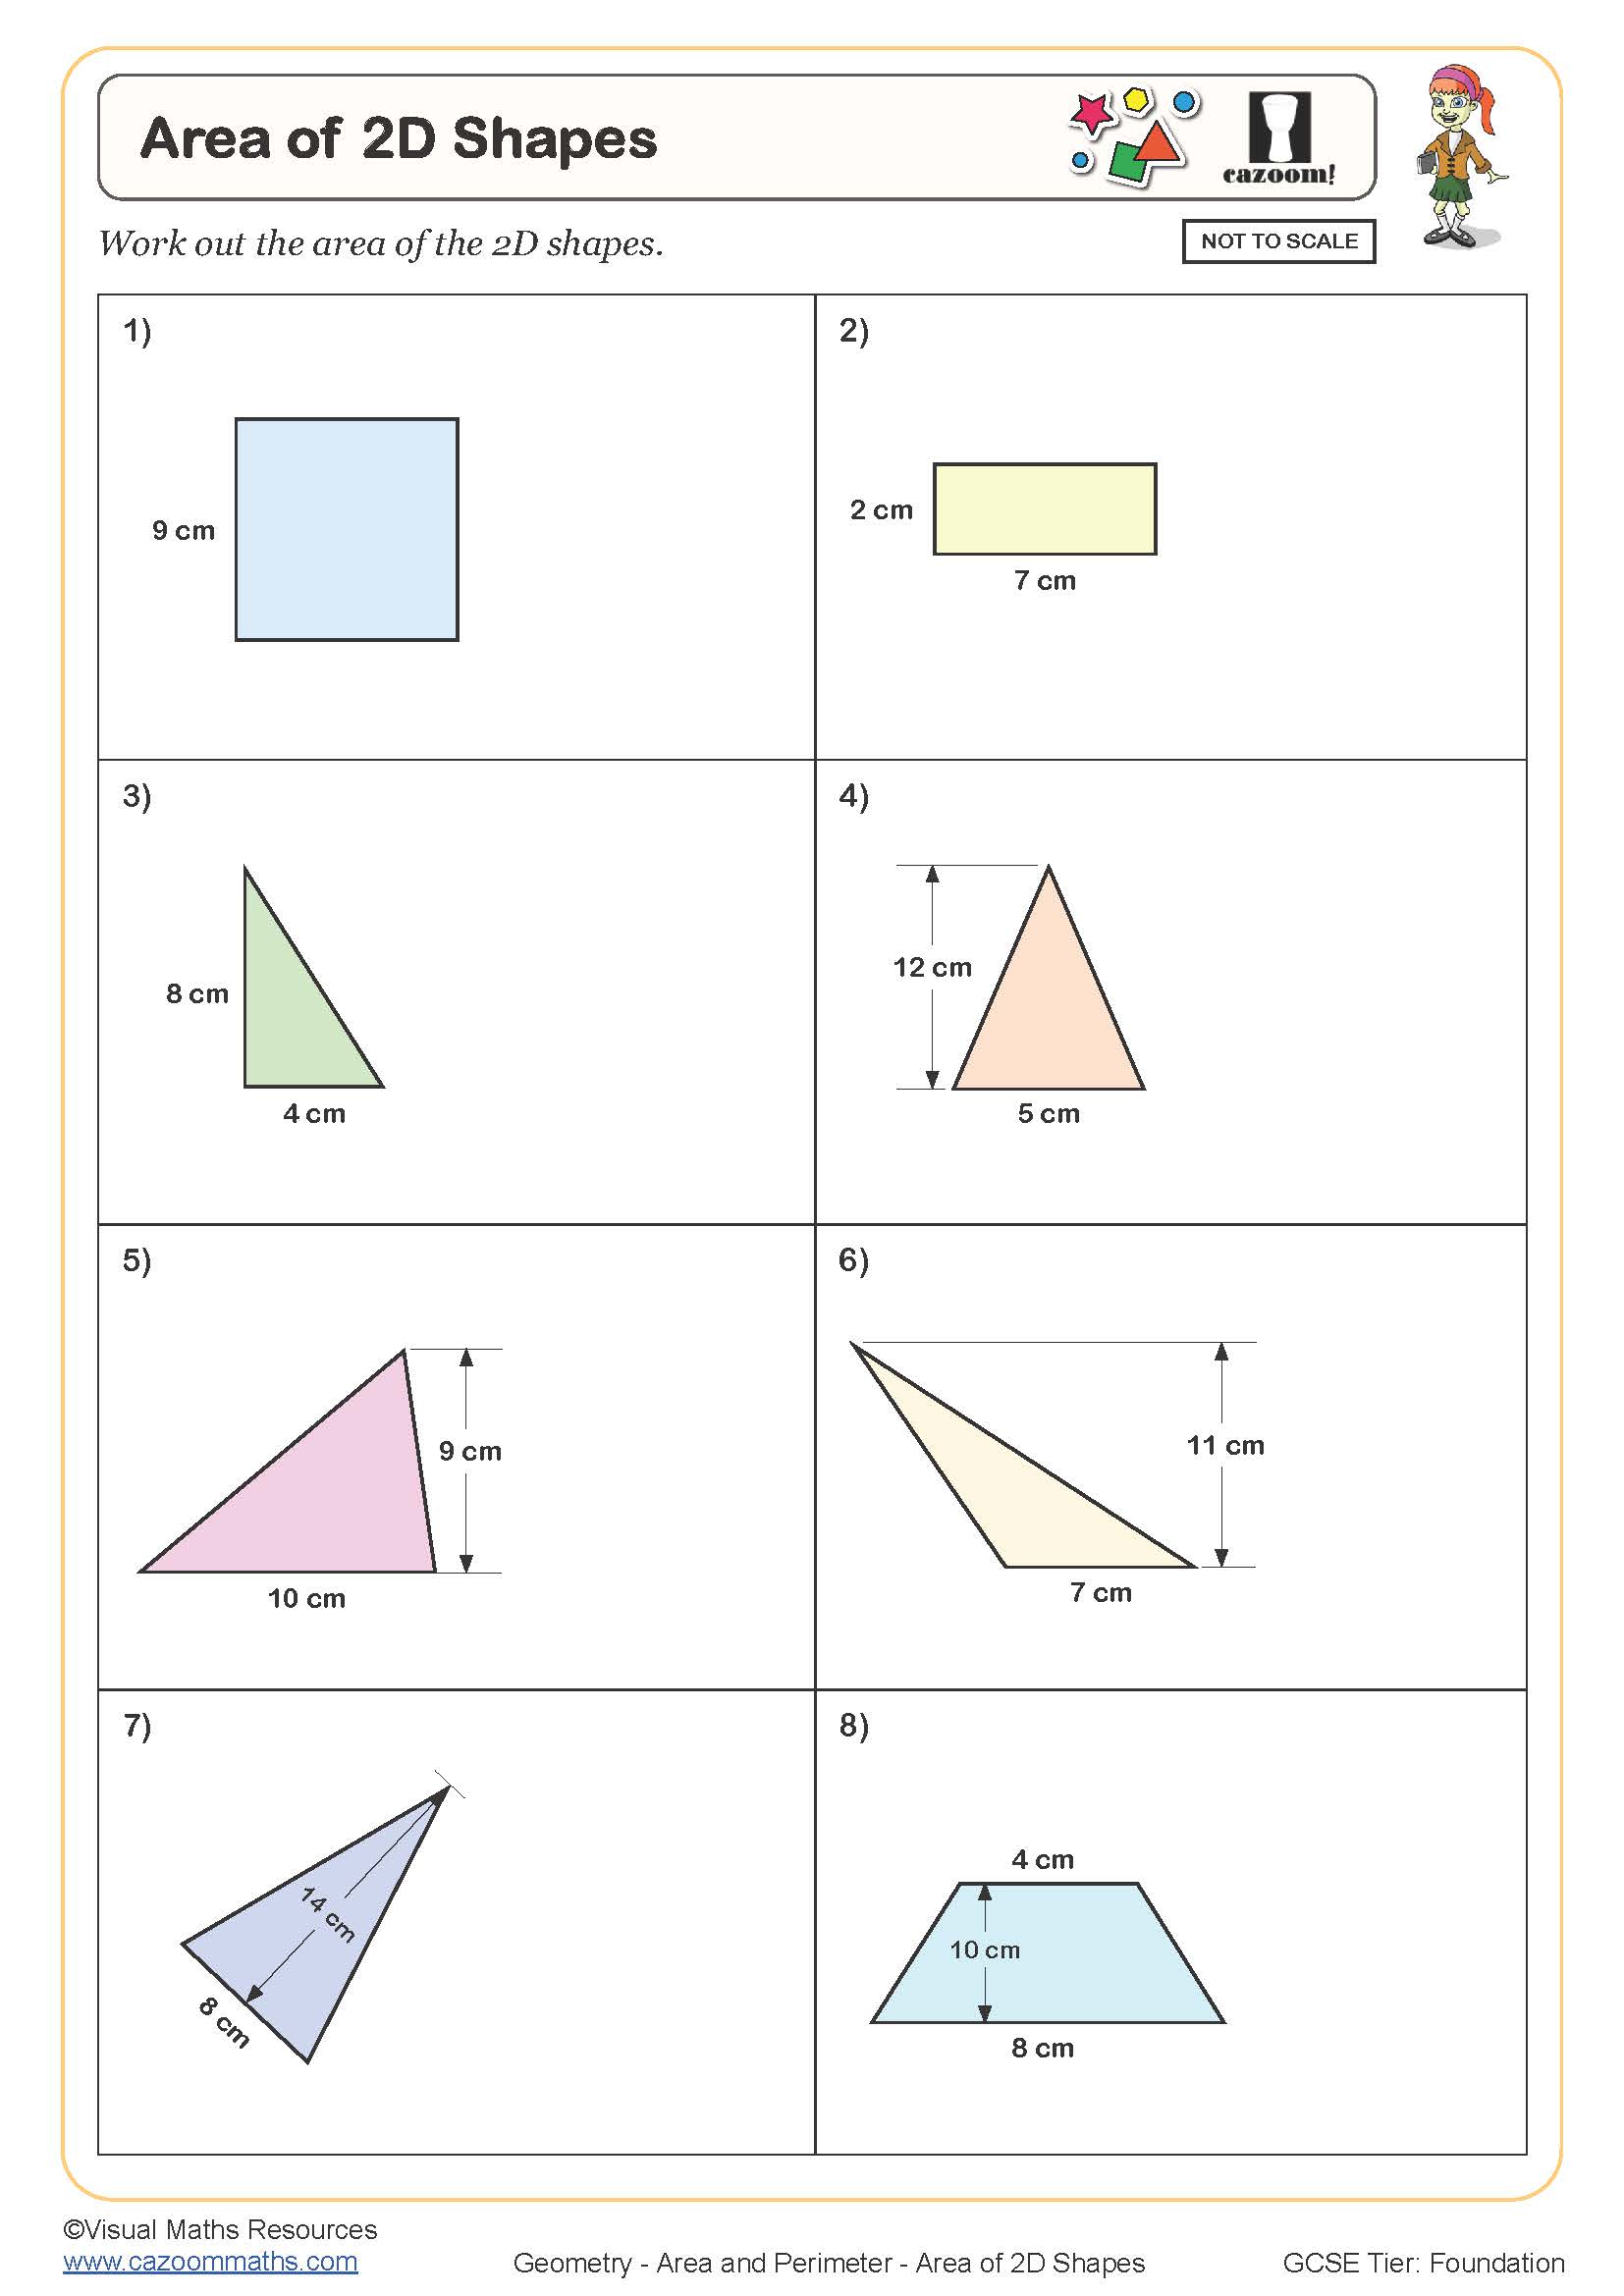 Area of 2D shapes Worksheet suitable for students in KS3